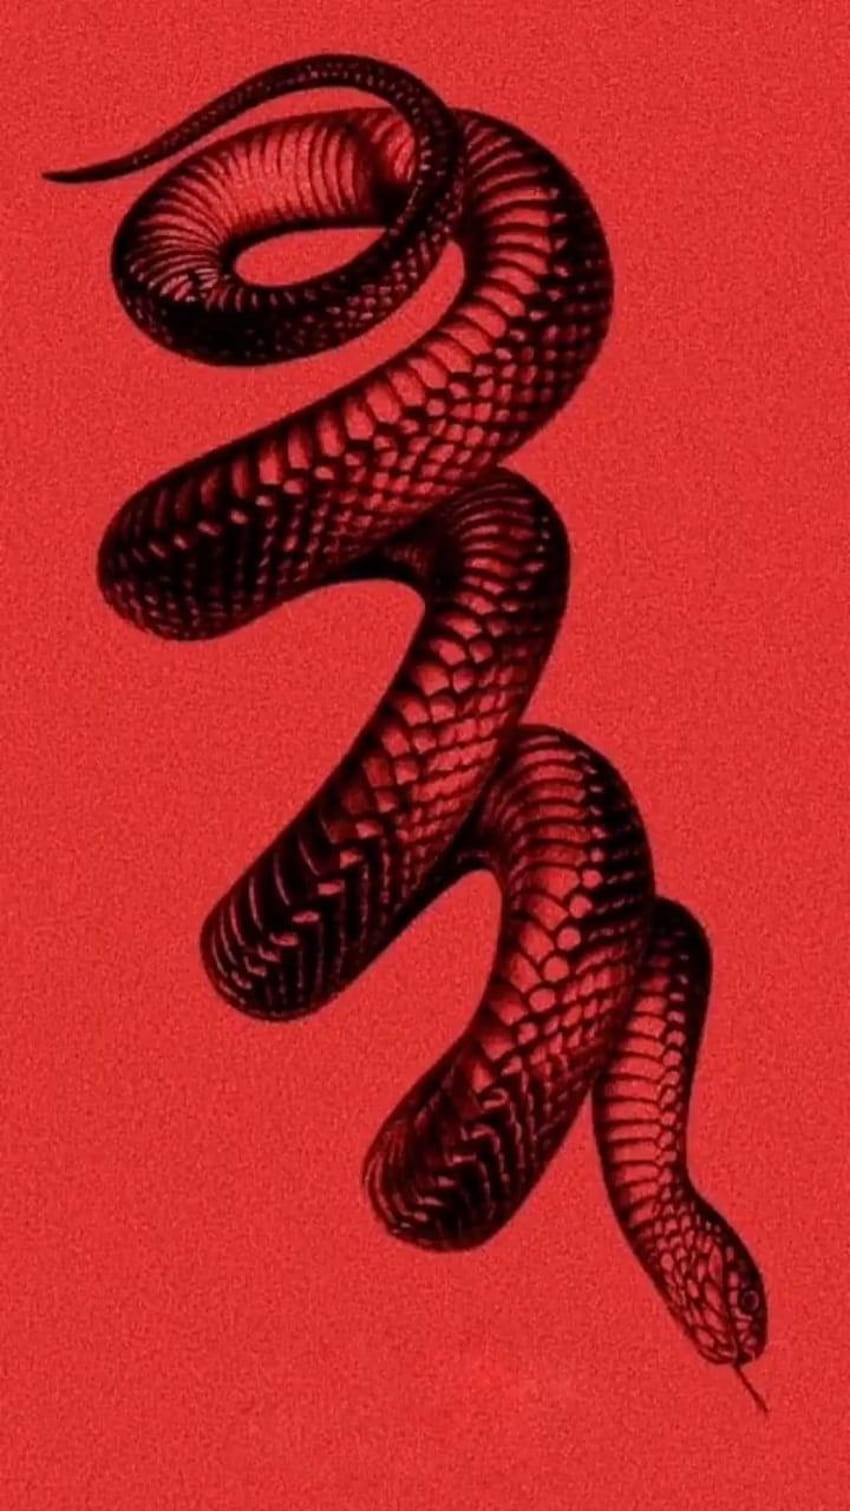 The snake and its tail - Red, snake